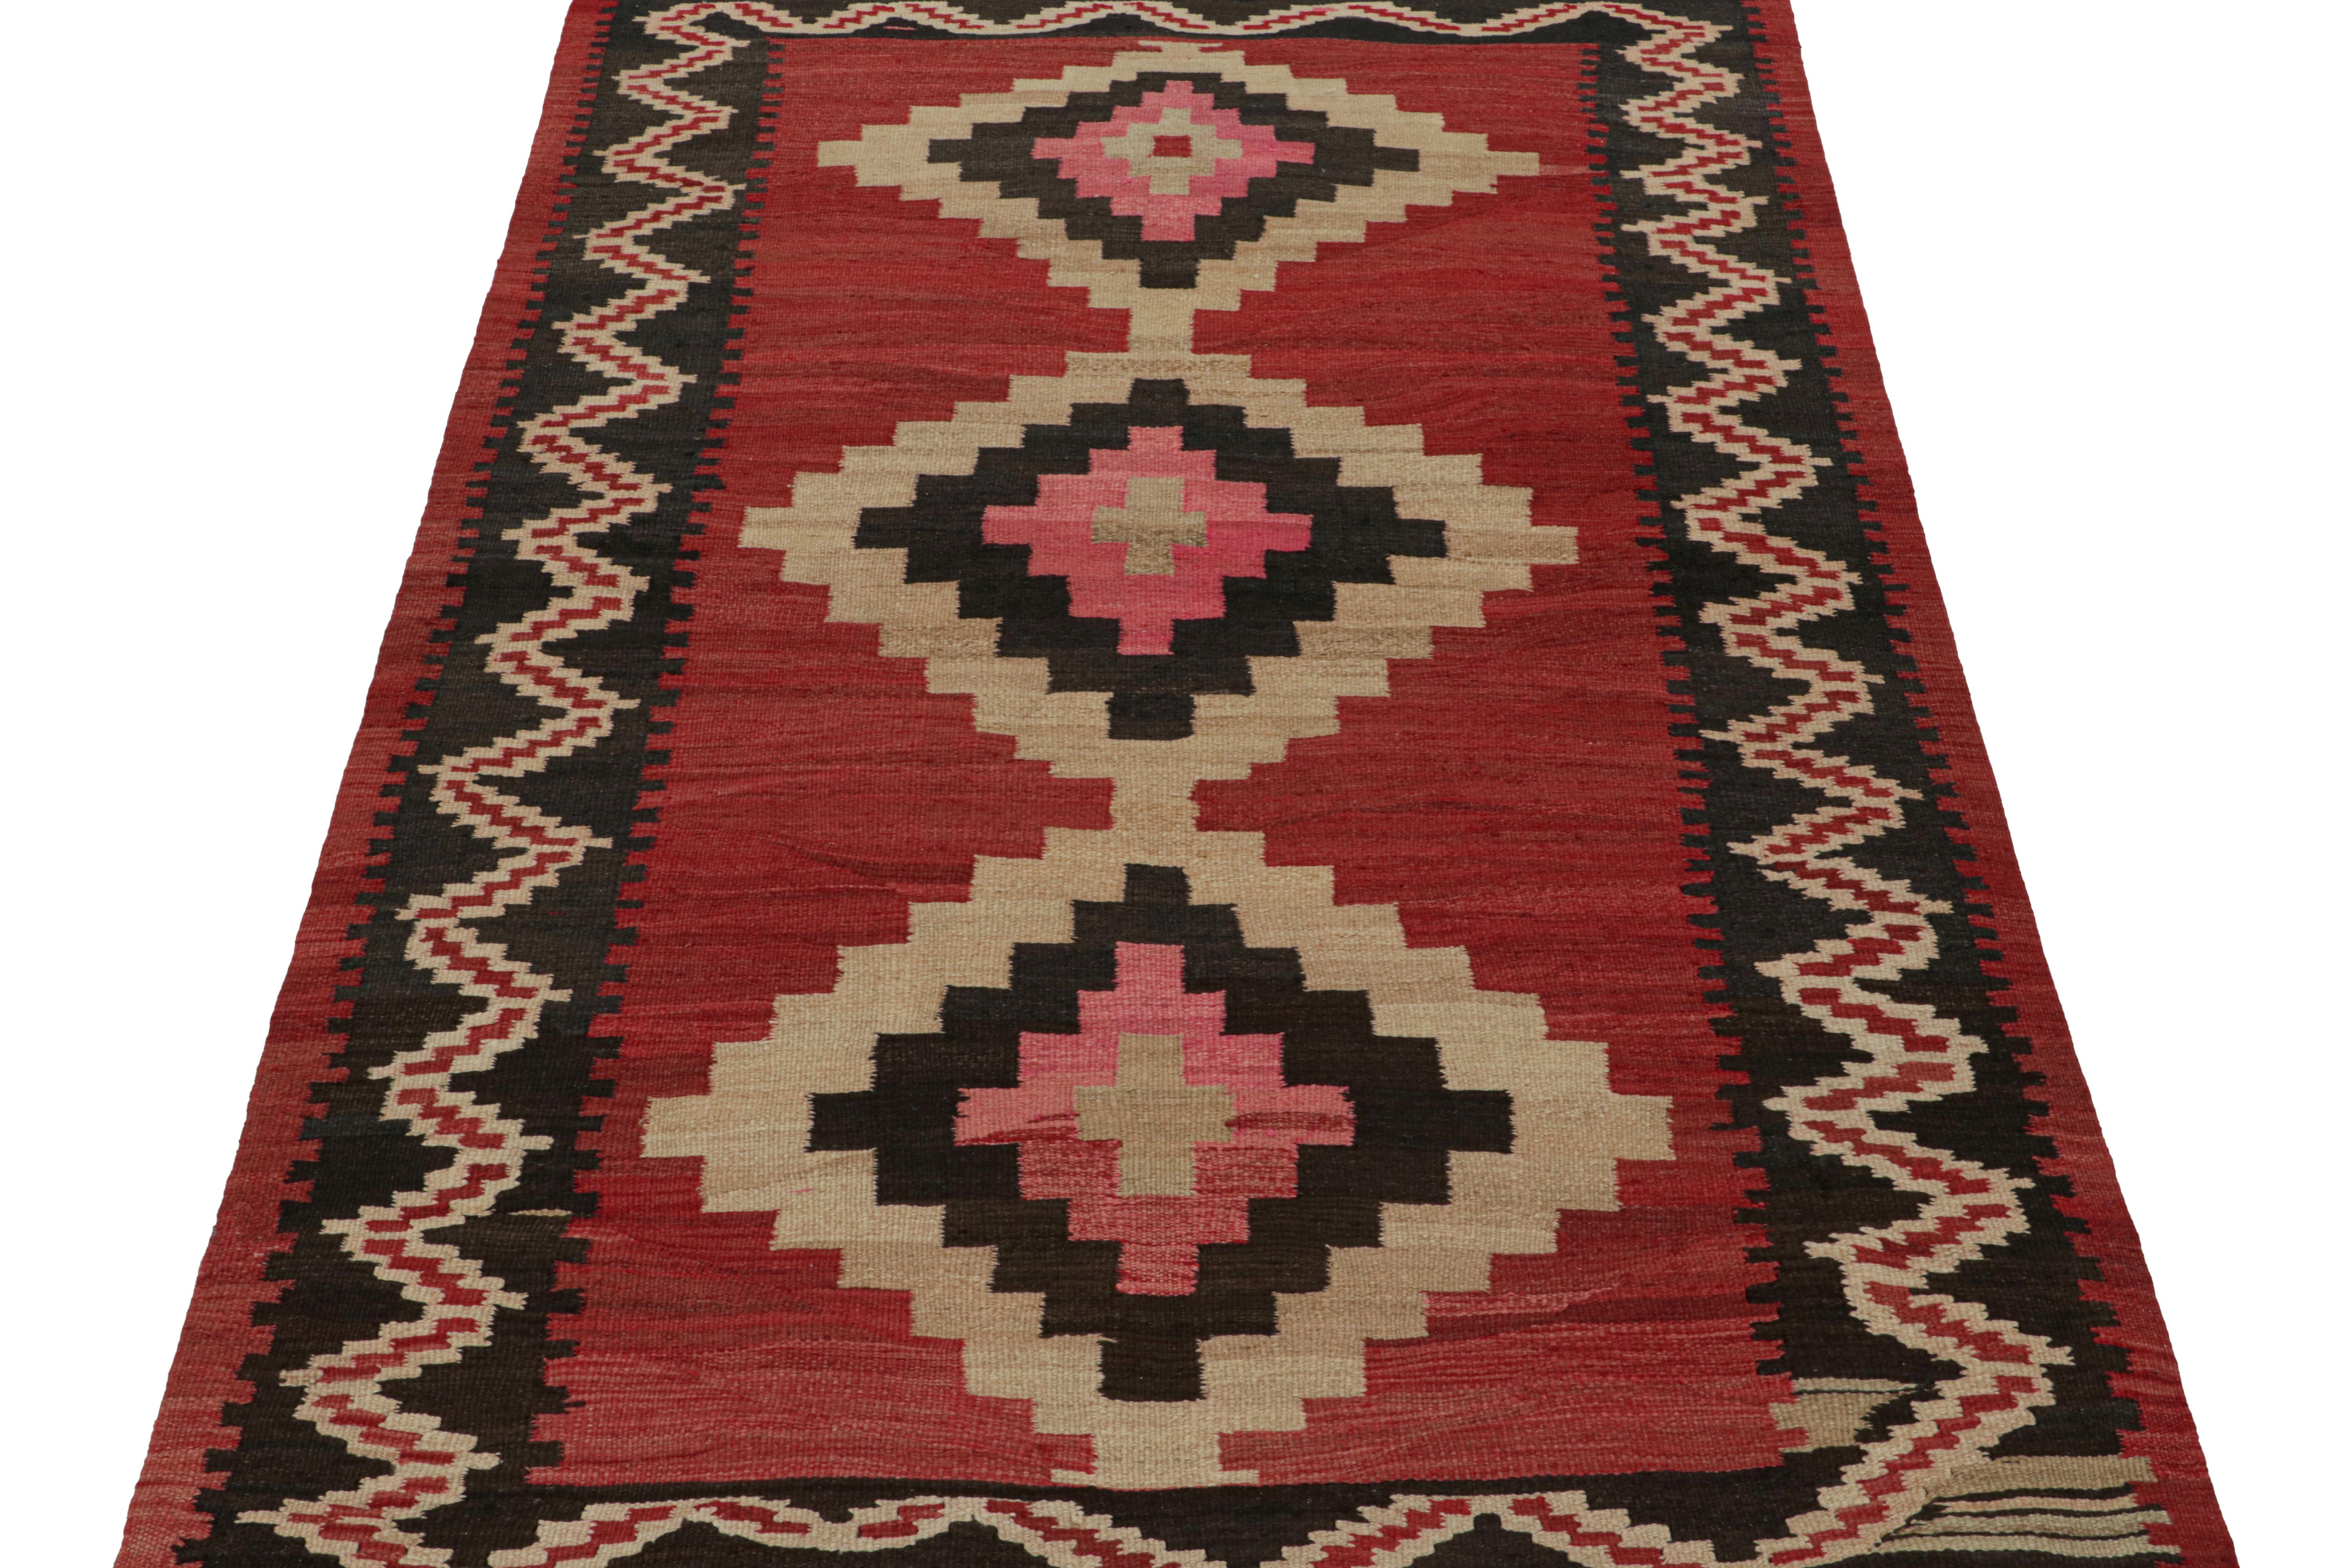 Vintage Shahsavan Persian Kilim in Red, Beige & Black Patterns by Rug & Kilim In Good Condition For Sale In Long Island City, NY